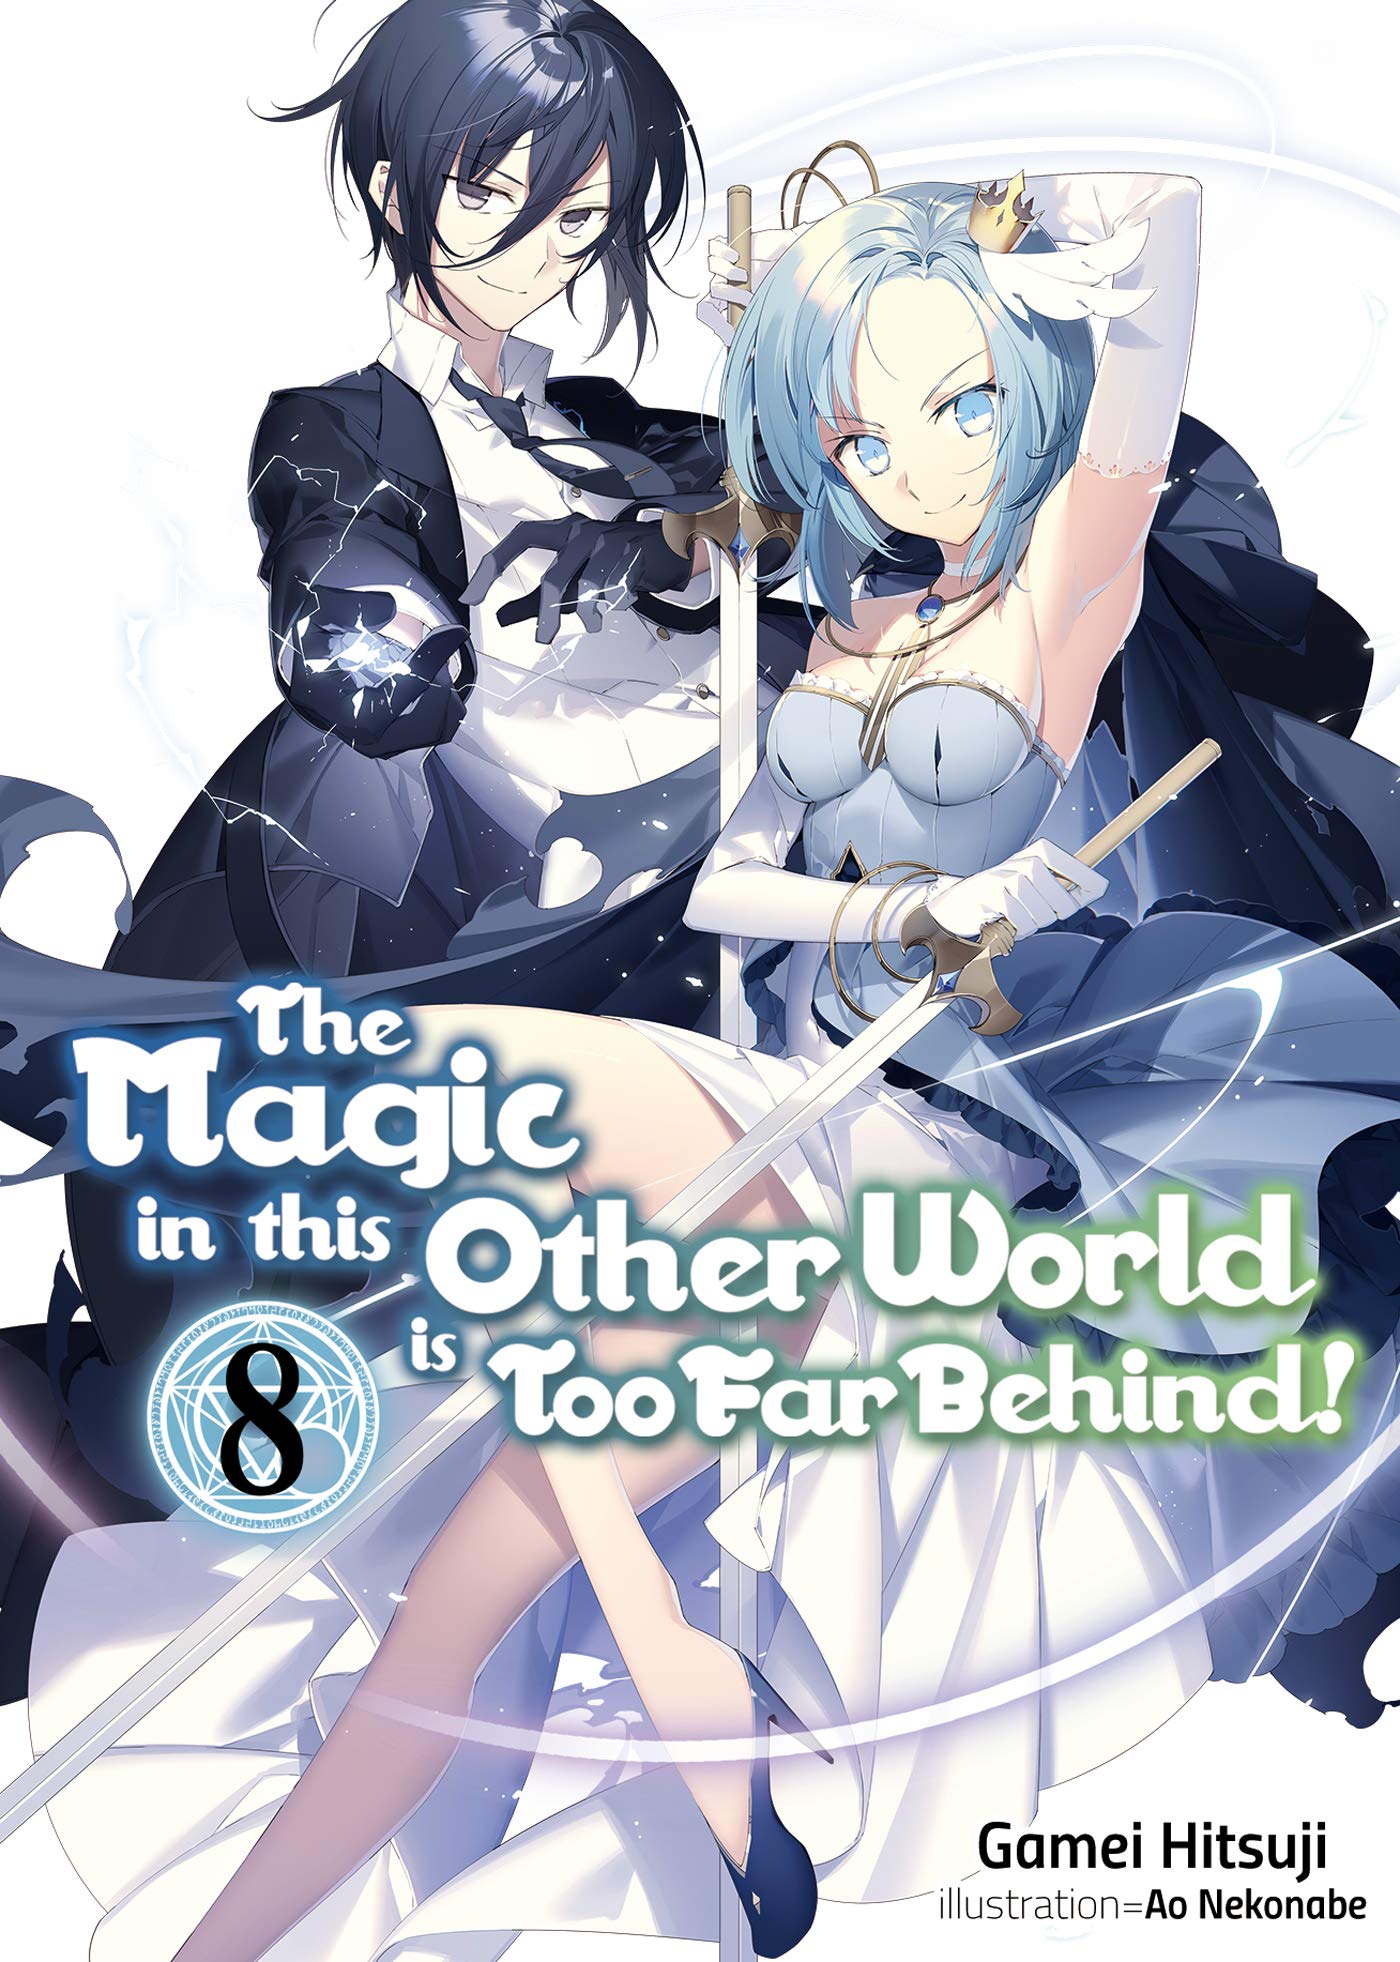 The Magic in this Other World is Too Far Behind! - Volume 8 | Gamei Hitsuji